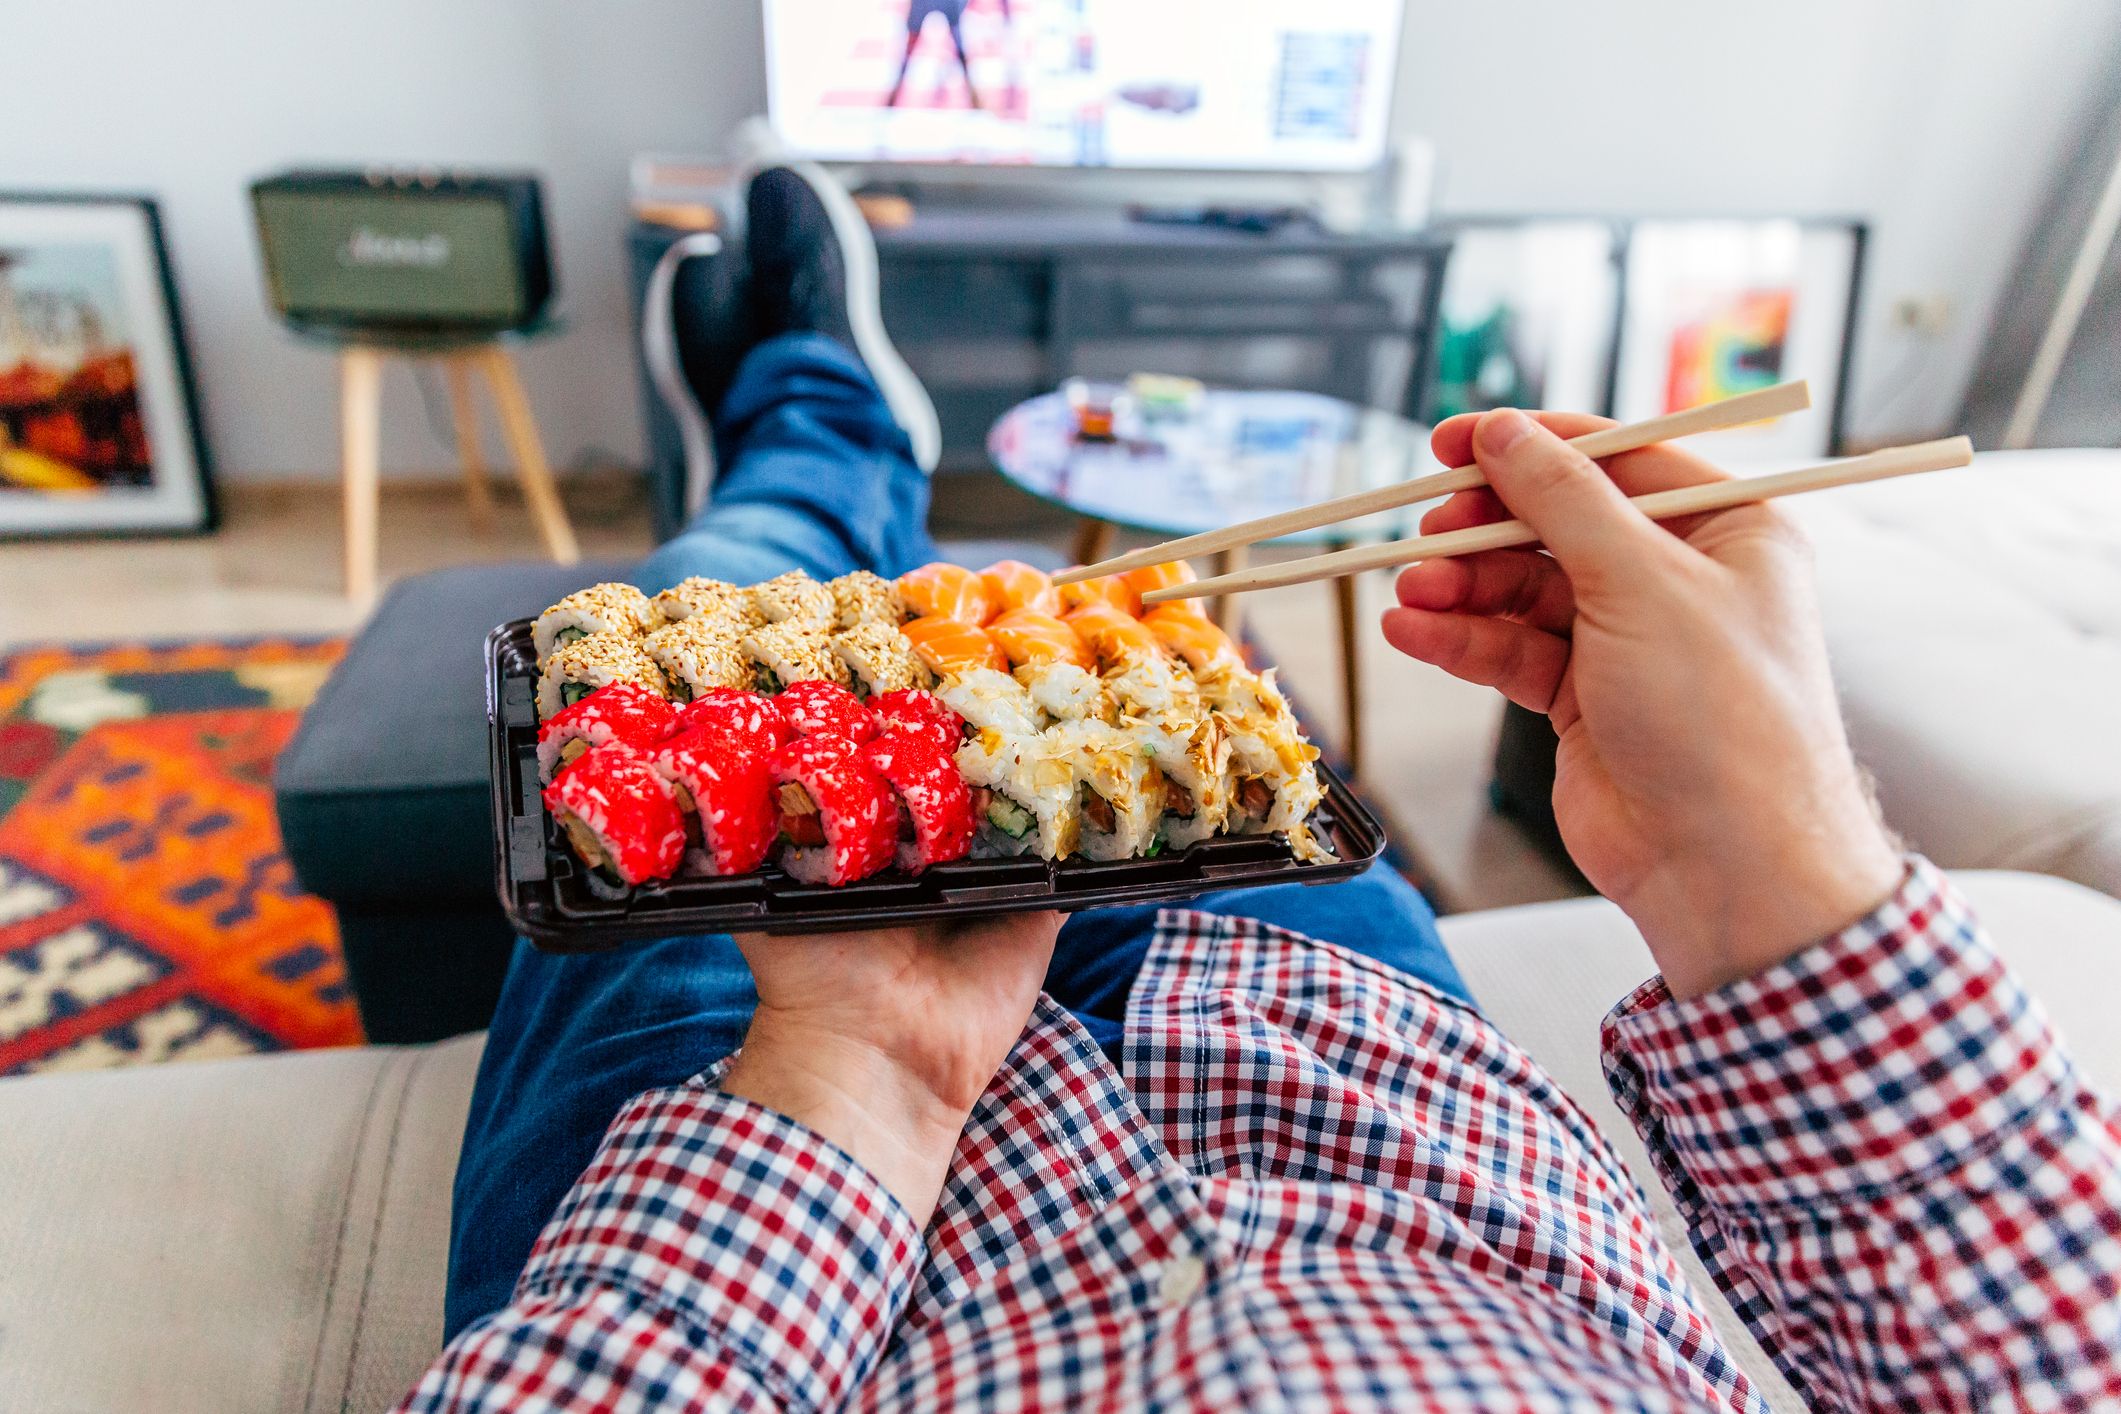 Eating Sushi Delivery At Home While Laying On The Royalty Free Image 1638300794 